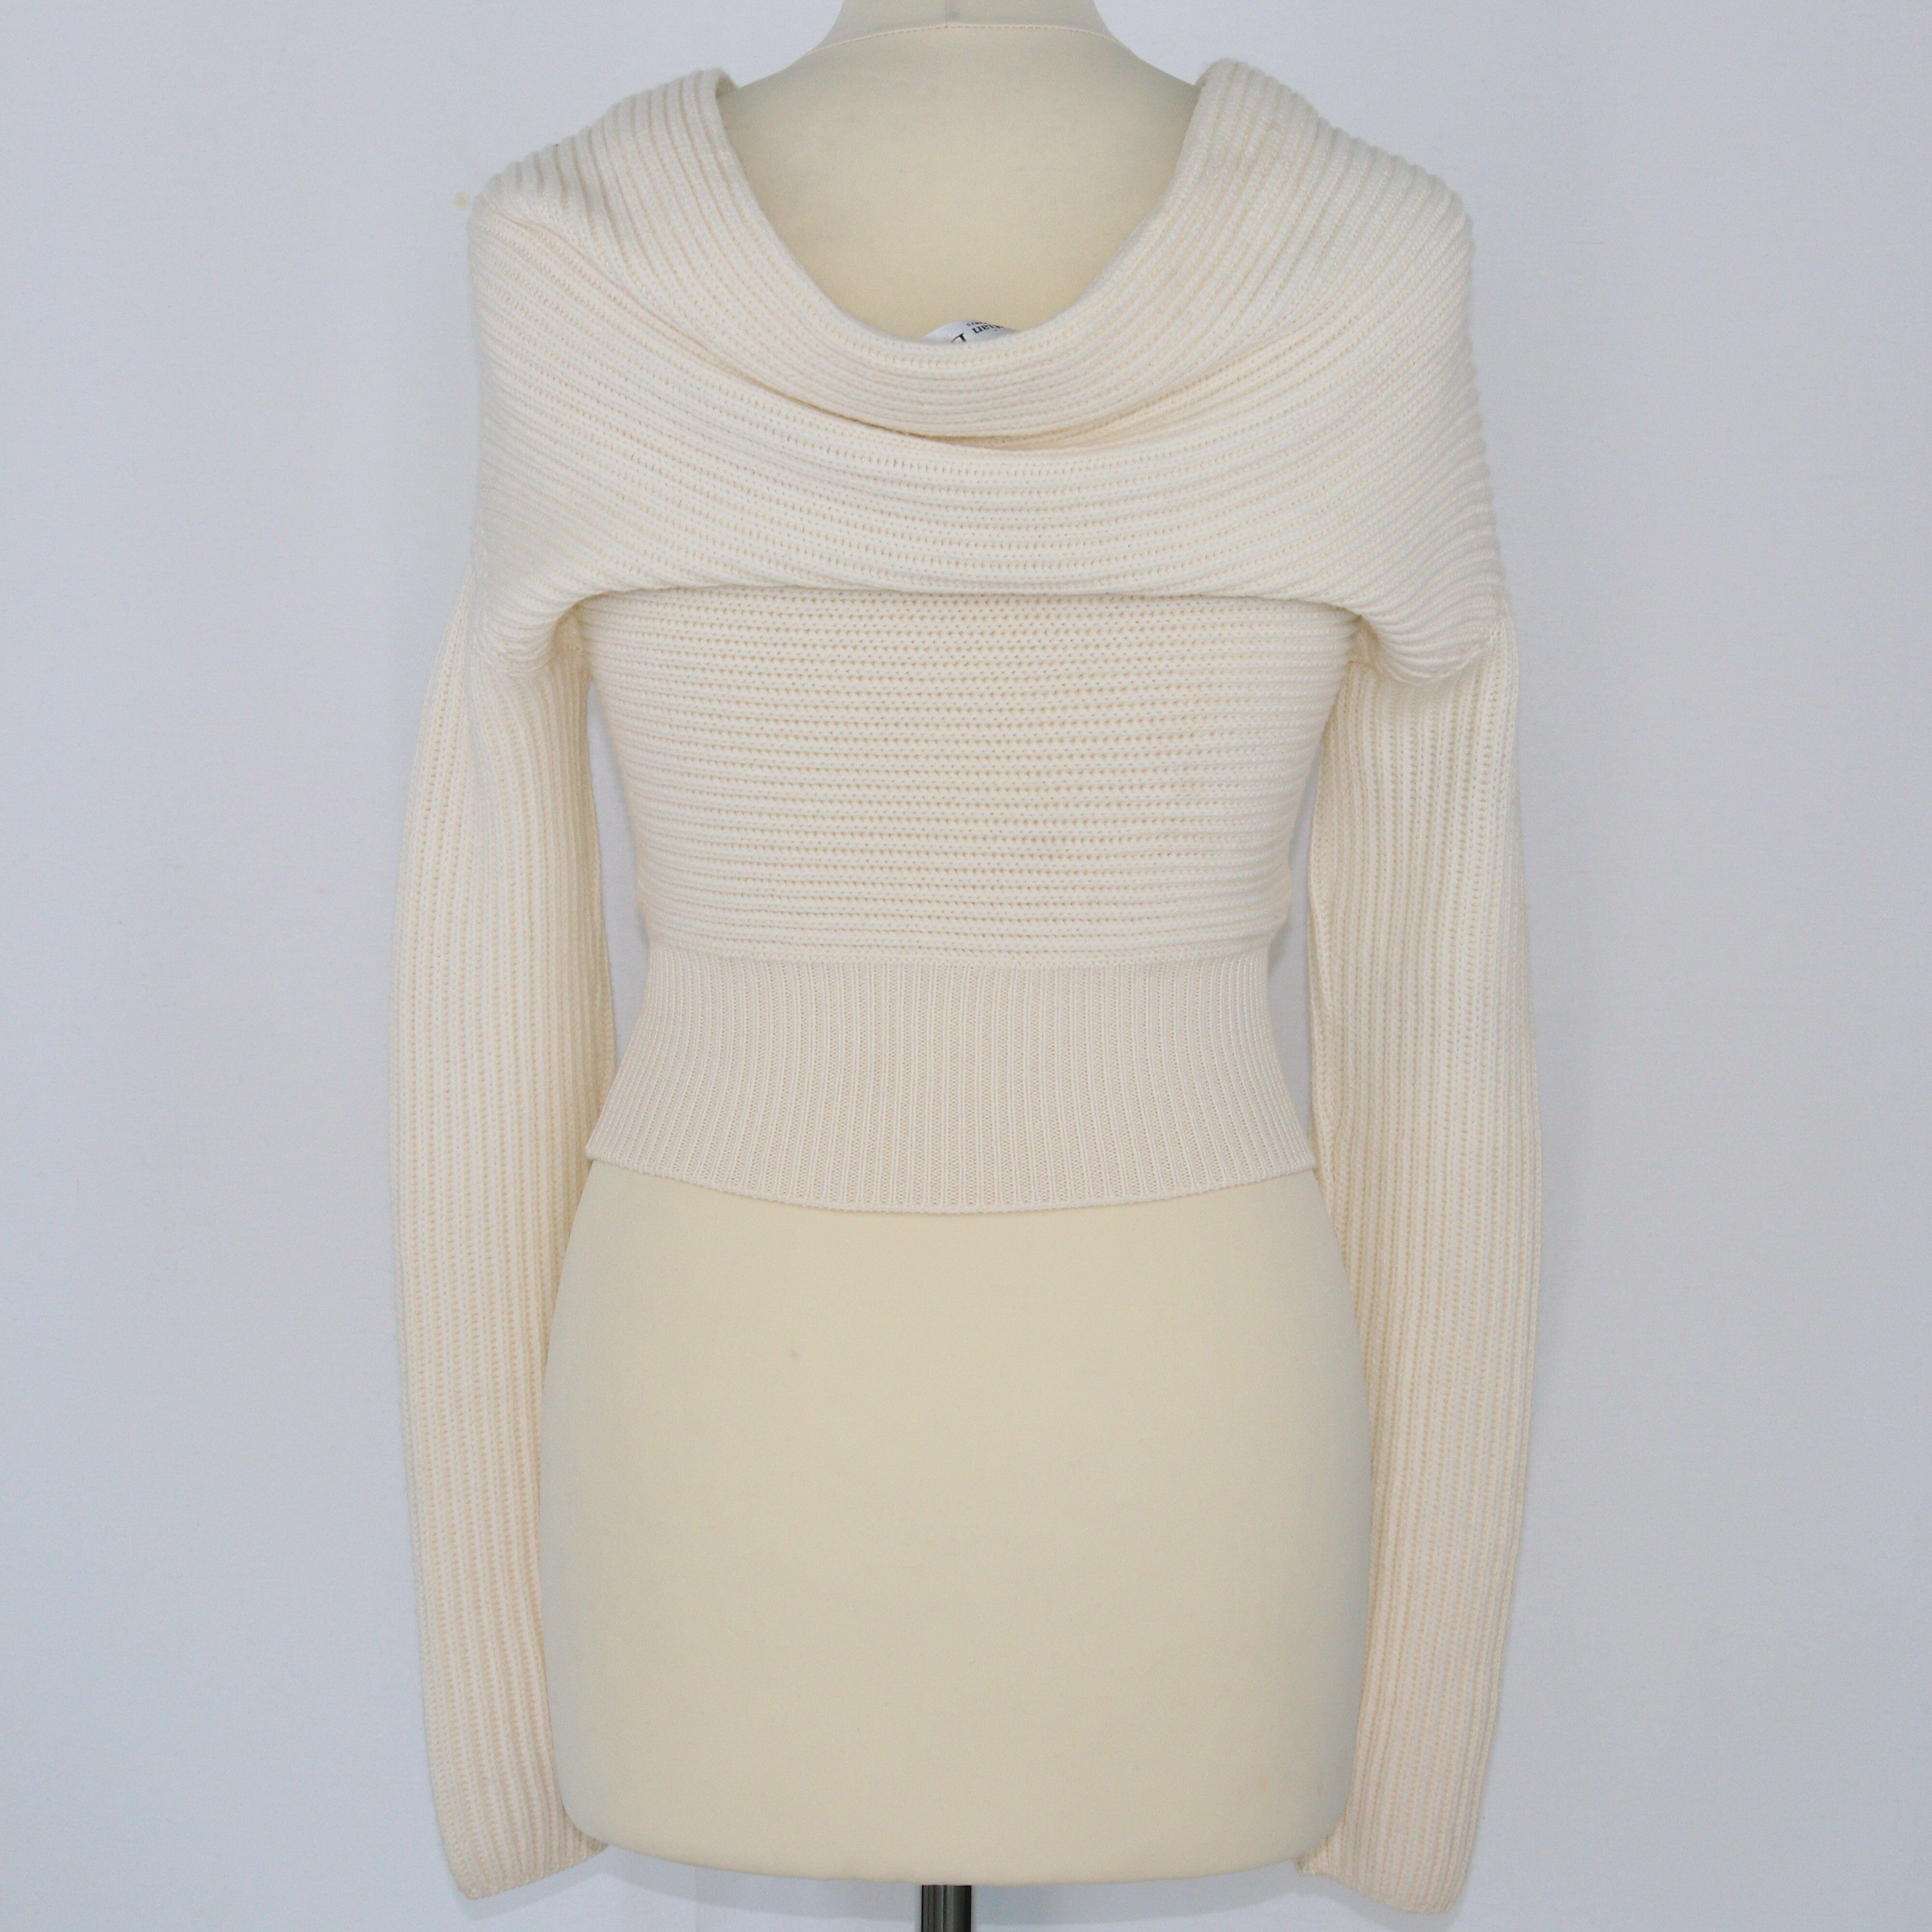 Cream Off-Shoulder Crop Top Sweater Clothing Christian Dior 